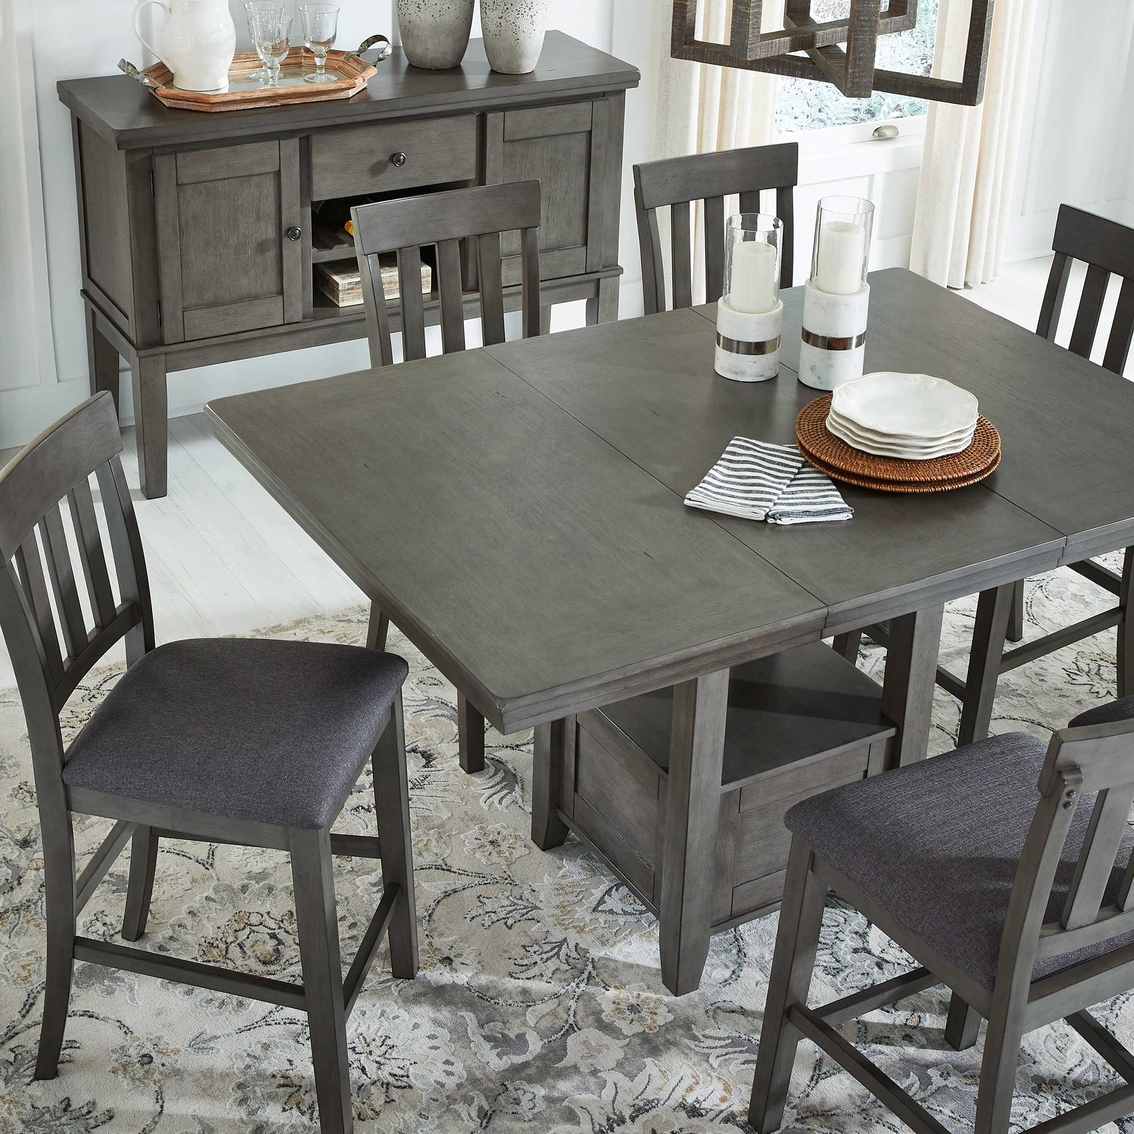 Signature Design by Ashley Hallanden 7 pc. Counter Dining Set - Image 6 of 7